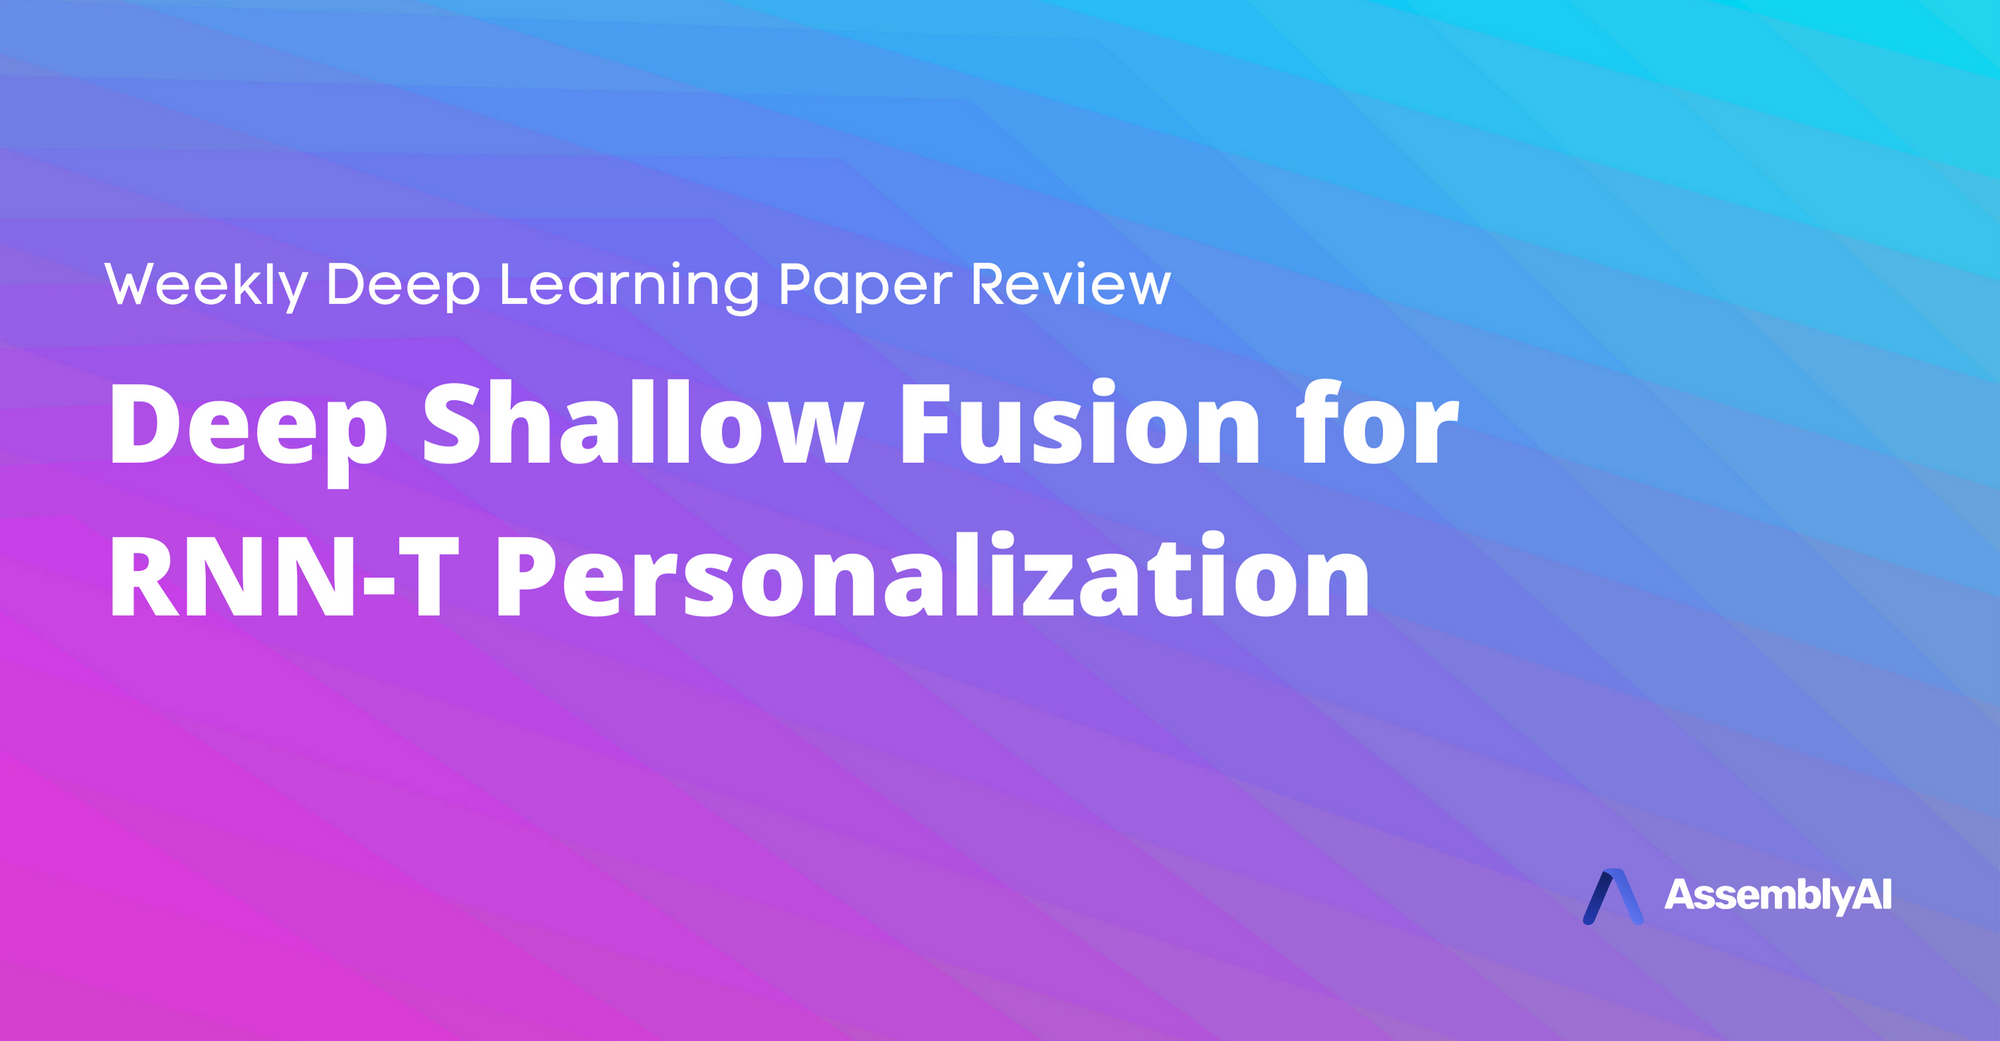 Deep Shallow Fusion for RNN-T Personalization